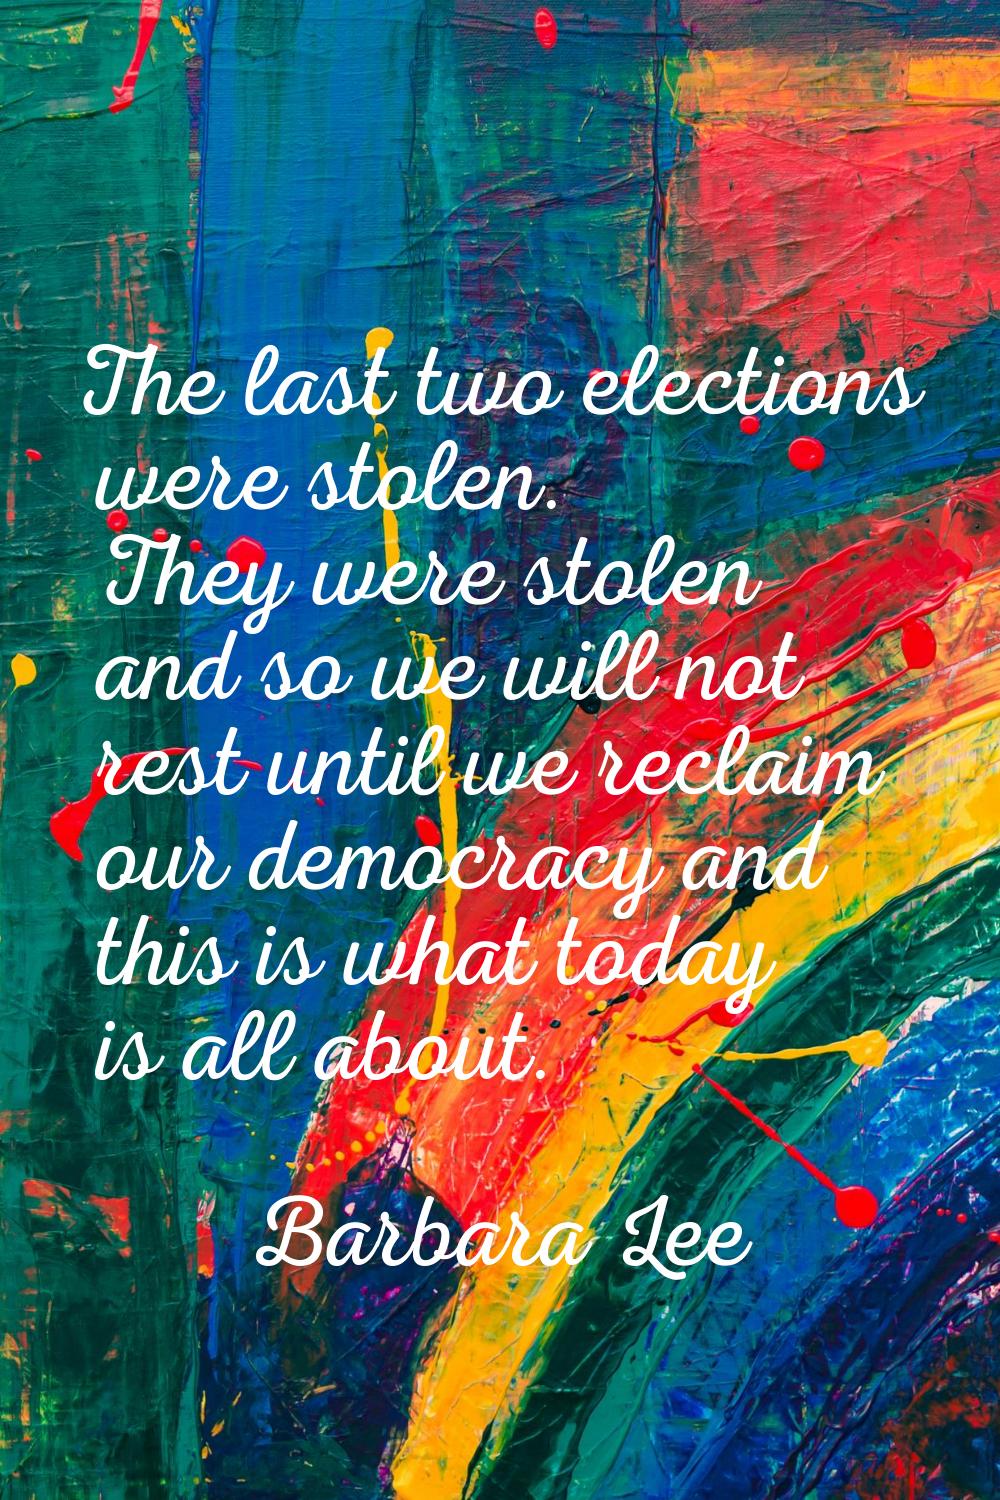 The last two elections were stolen. They were stolen and so we will not rest until we reclaim our d